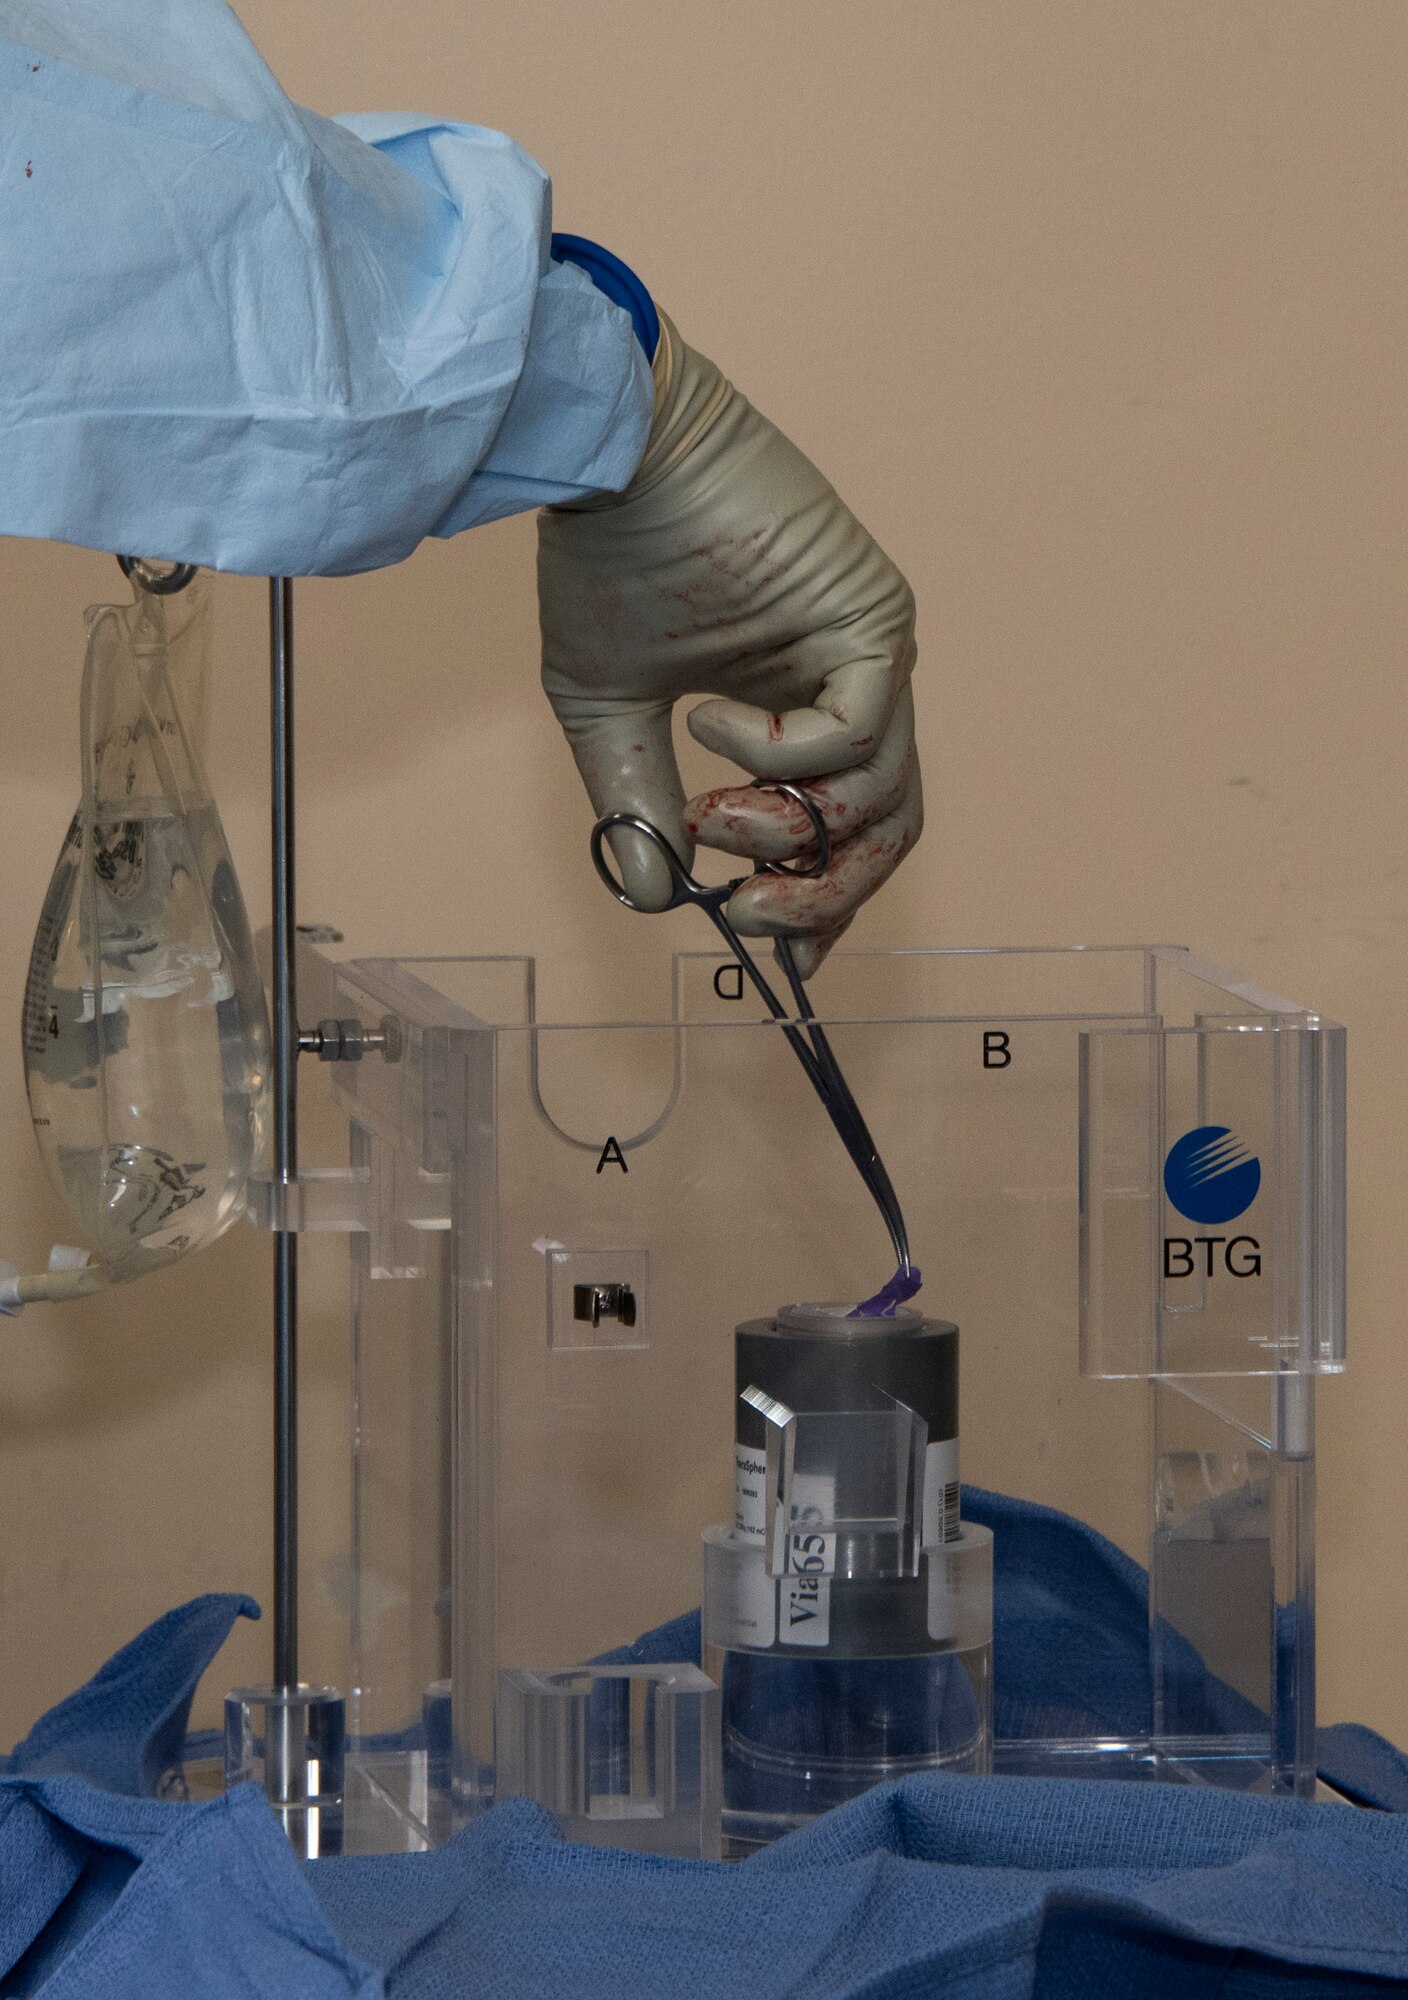 U.S. Air Force doctors prepare a high dose of Yttrium-90 radioactive beads during a procedure at David Grant U.S. Air Force Medical center, Sept. 7, 2018, Travis Air Force Base, Calif. The Y-90 radioembolization is an advanced and minimally invasive method utilized to treat cancer by delivering millions of tiny radioactive beads inside the blood vessels that feed a tumor. The high dose of targeted radiation prospectively kills the tumor while sparing normal tissue. This was the first time the treatment was performed at DGMC. (U.S. Air Force photo by Heide Couch)